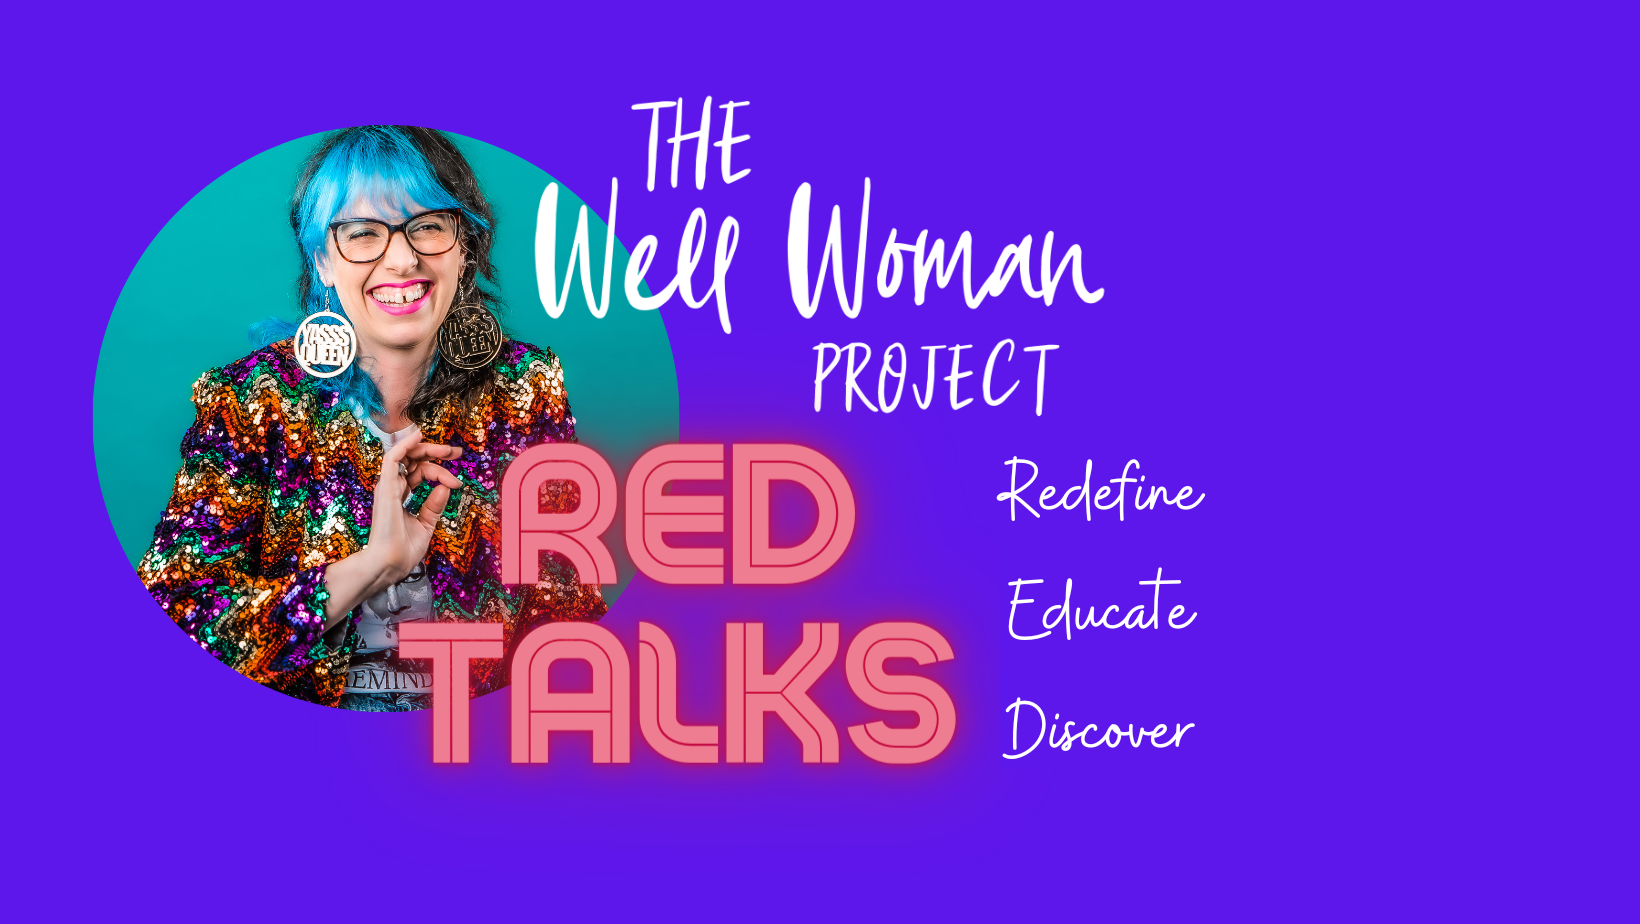 Redefine Educate Discover Gemma Well Woman Project Red Talks